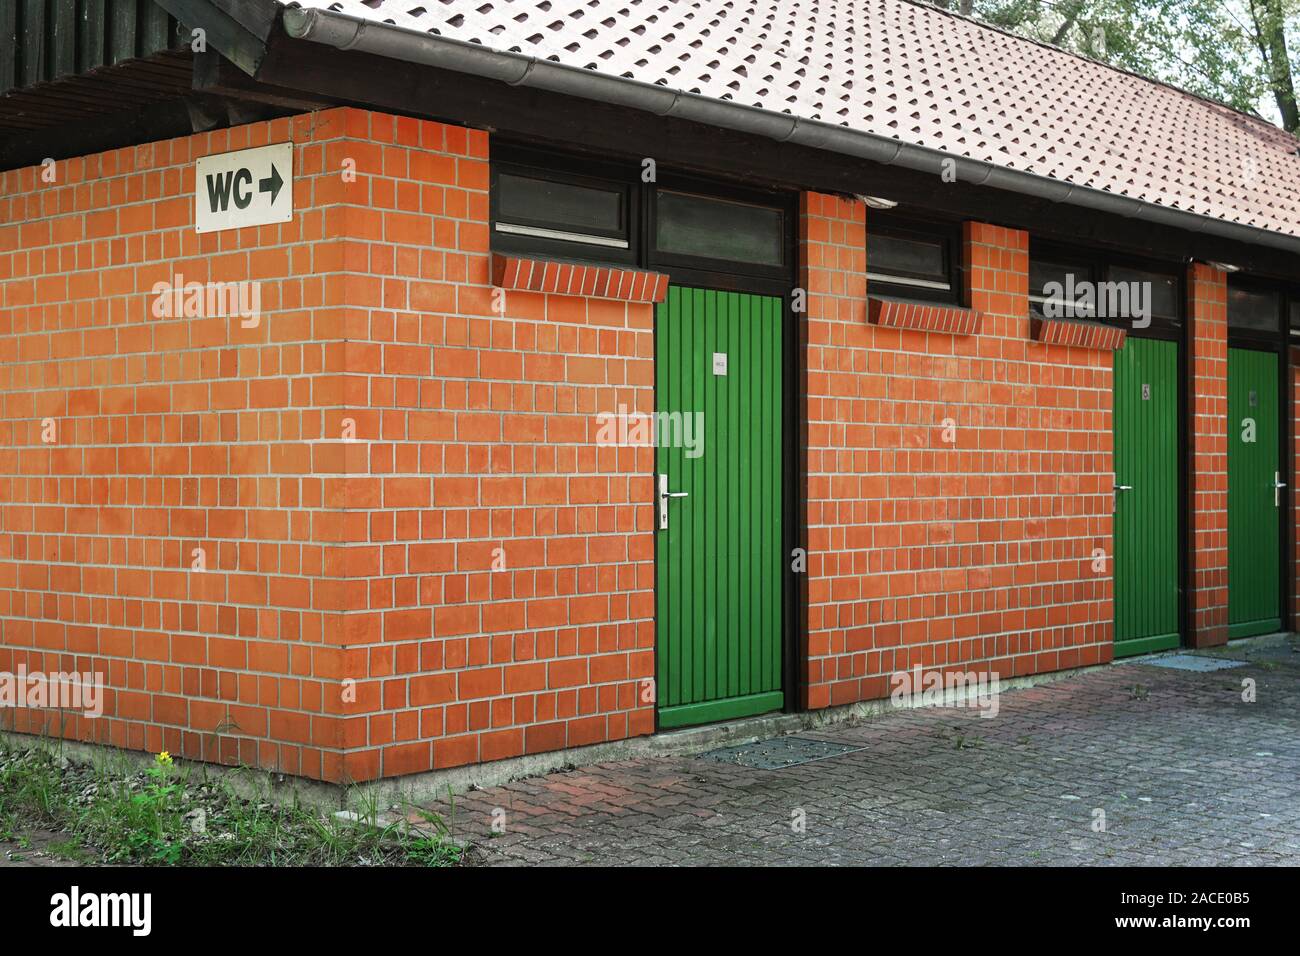 WC public toilet restroom building or outhouse Stock Photo